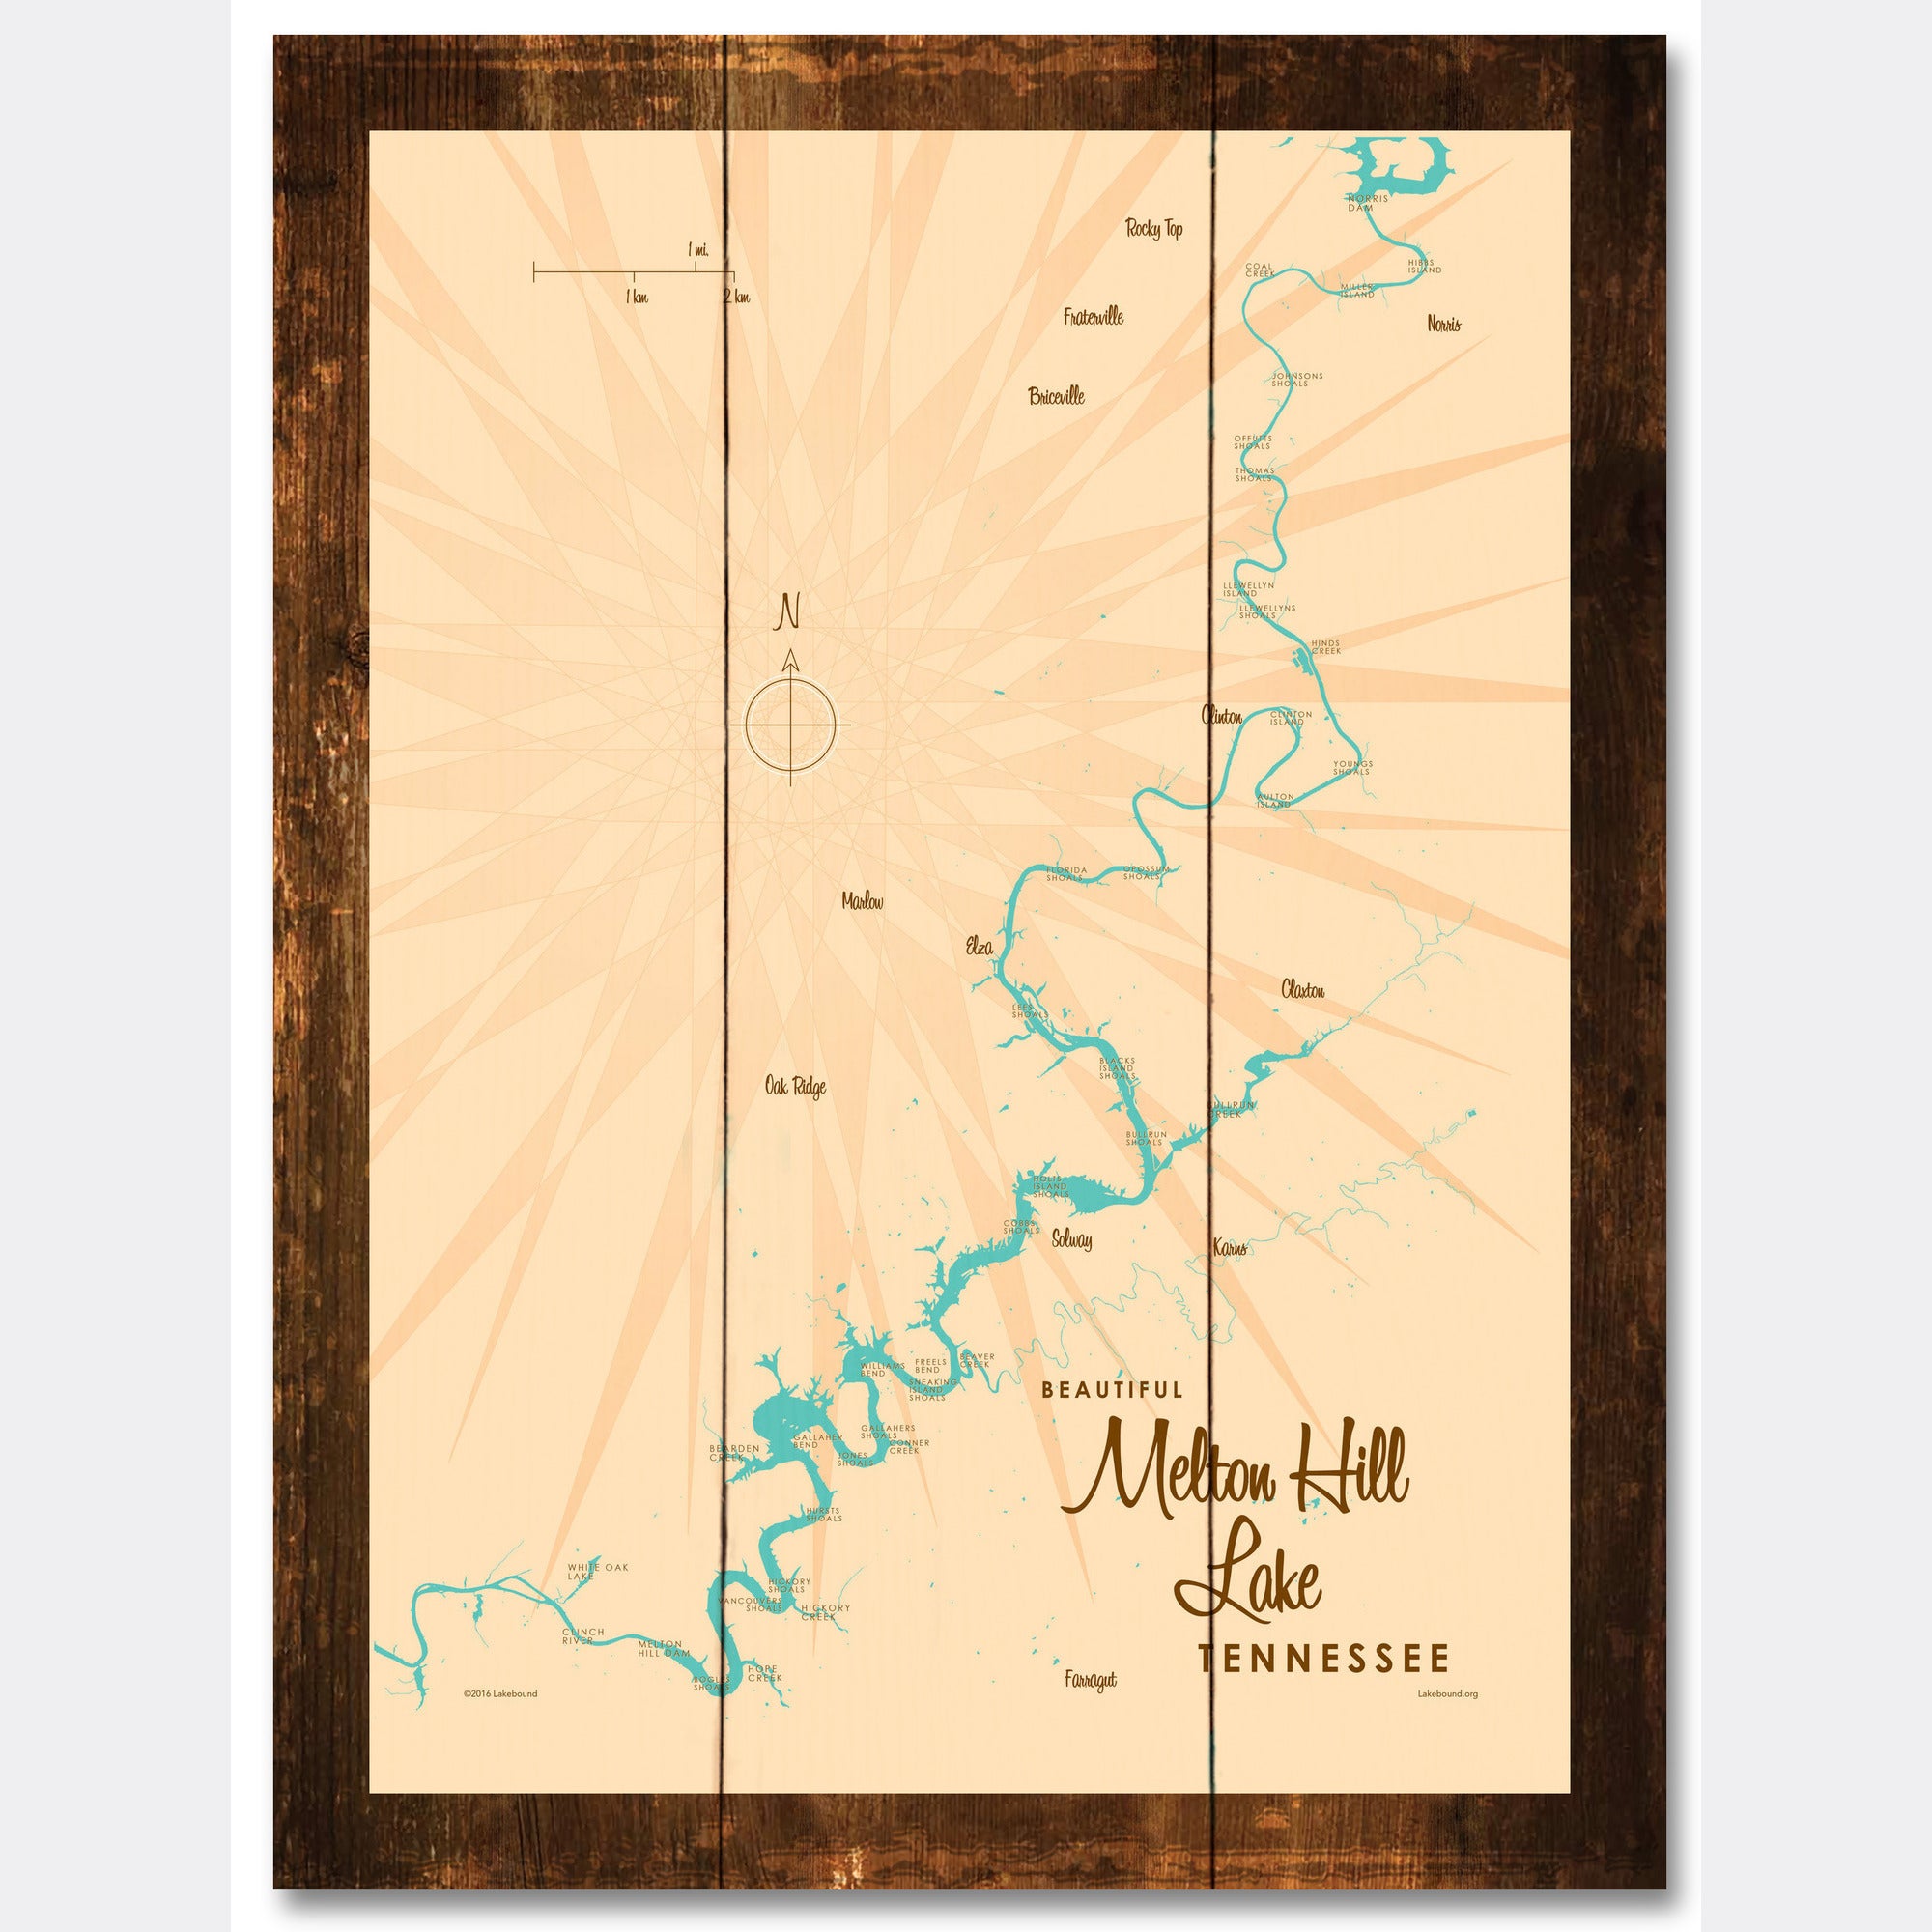 Melton Hill Lake Tennessee, Rustic Wood Sign Map Art